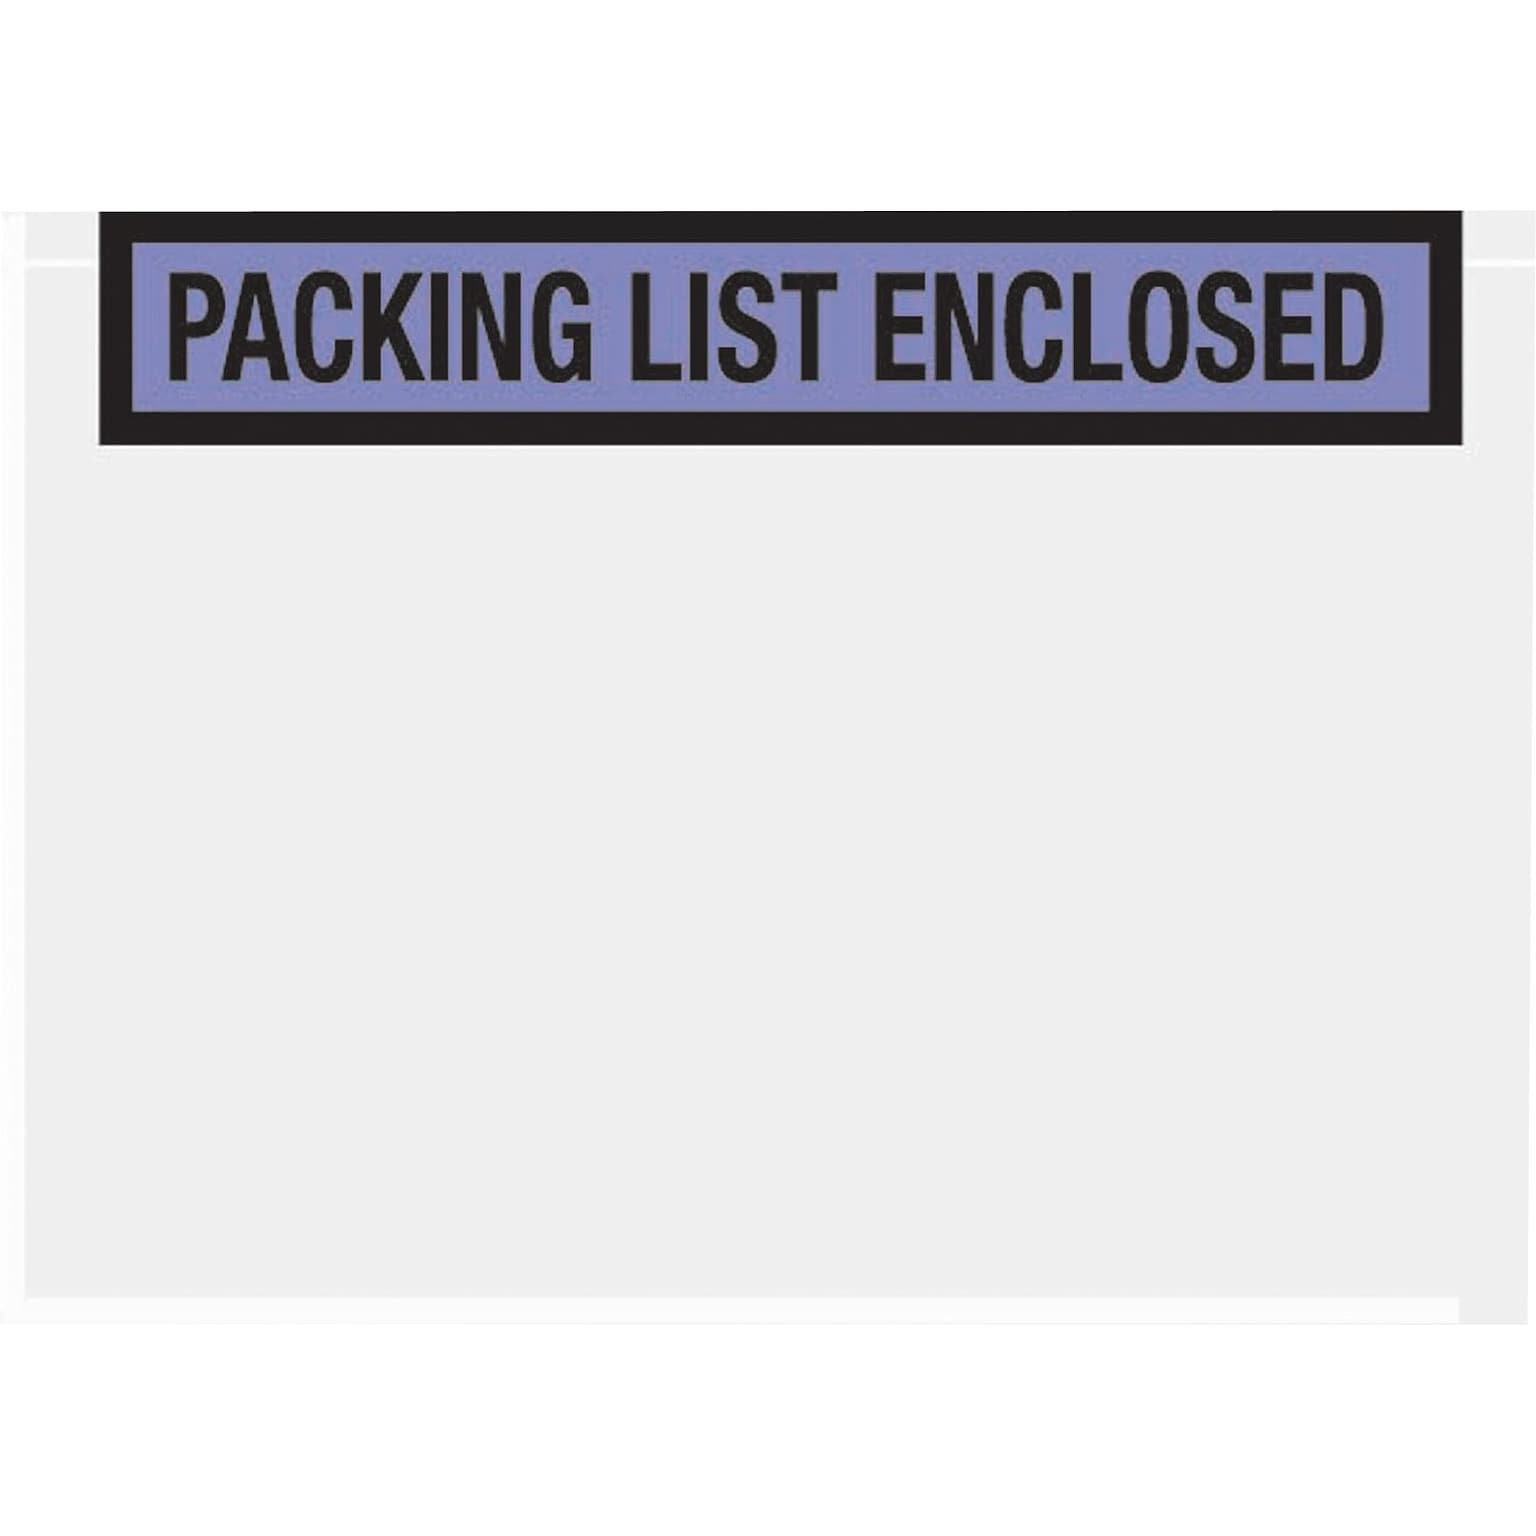 SI Products Packing List Envelopes, 7 x 5.5, Blue Panel Face, Packing List Enclosed, 1000/Case (PL458)